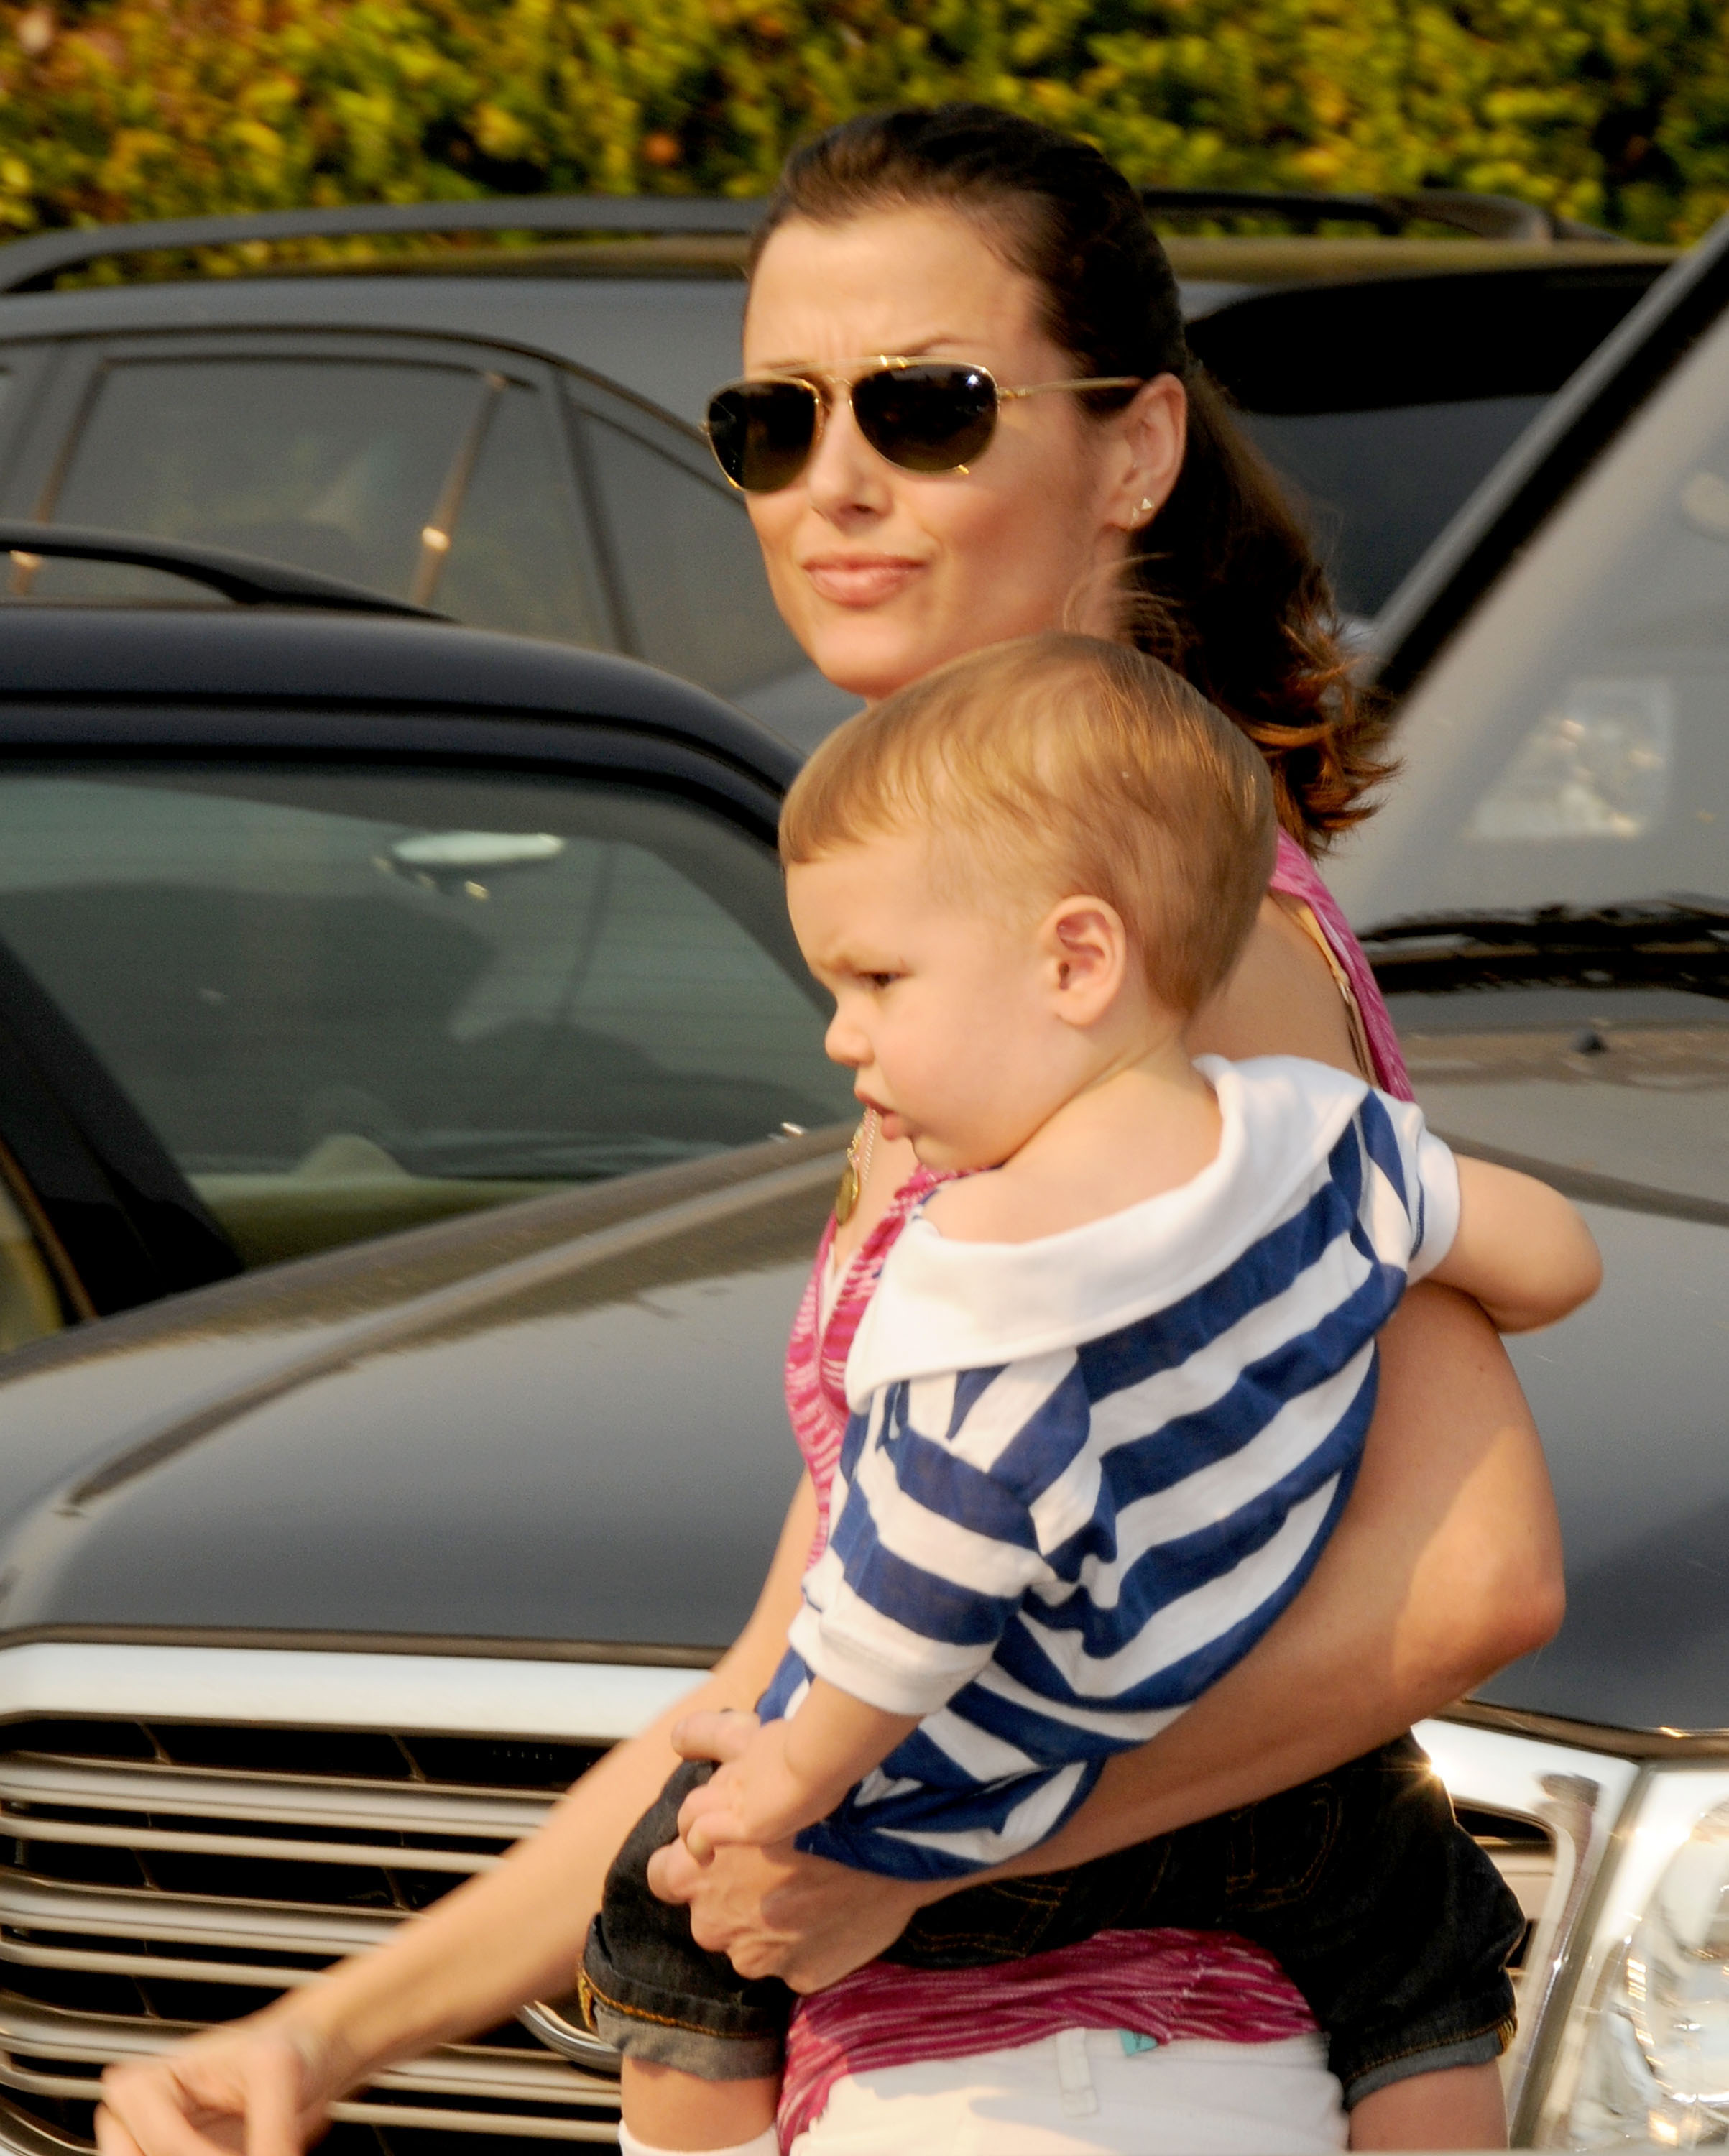 Bridget Moynahan with her son at the 11th Anniversary Of P.S. Arts "Express Yourself 2008" on November 16, 2008 in Santa Monica, California | Source: Getty Images